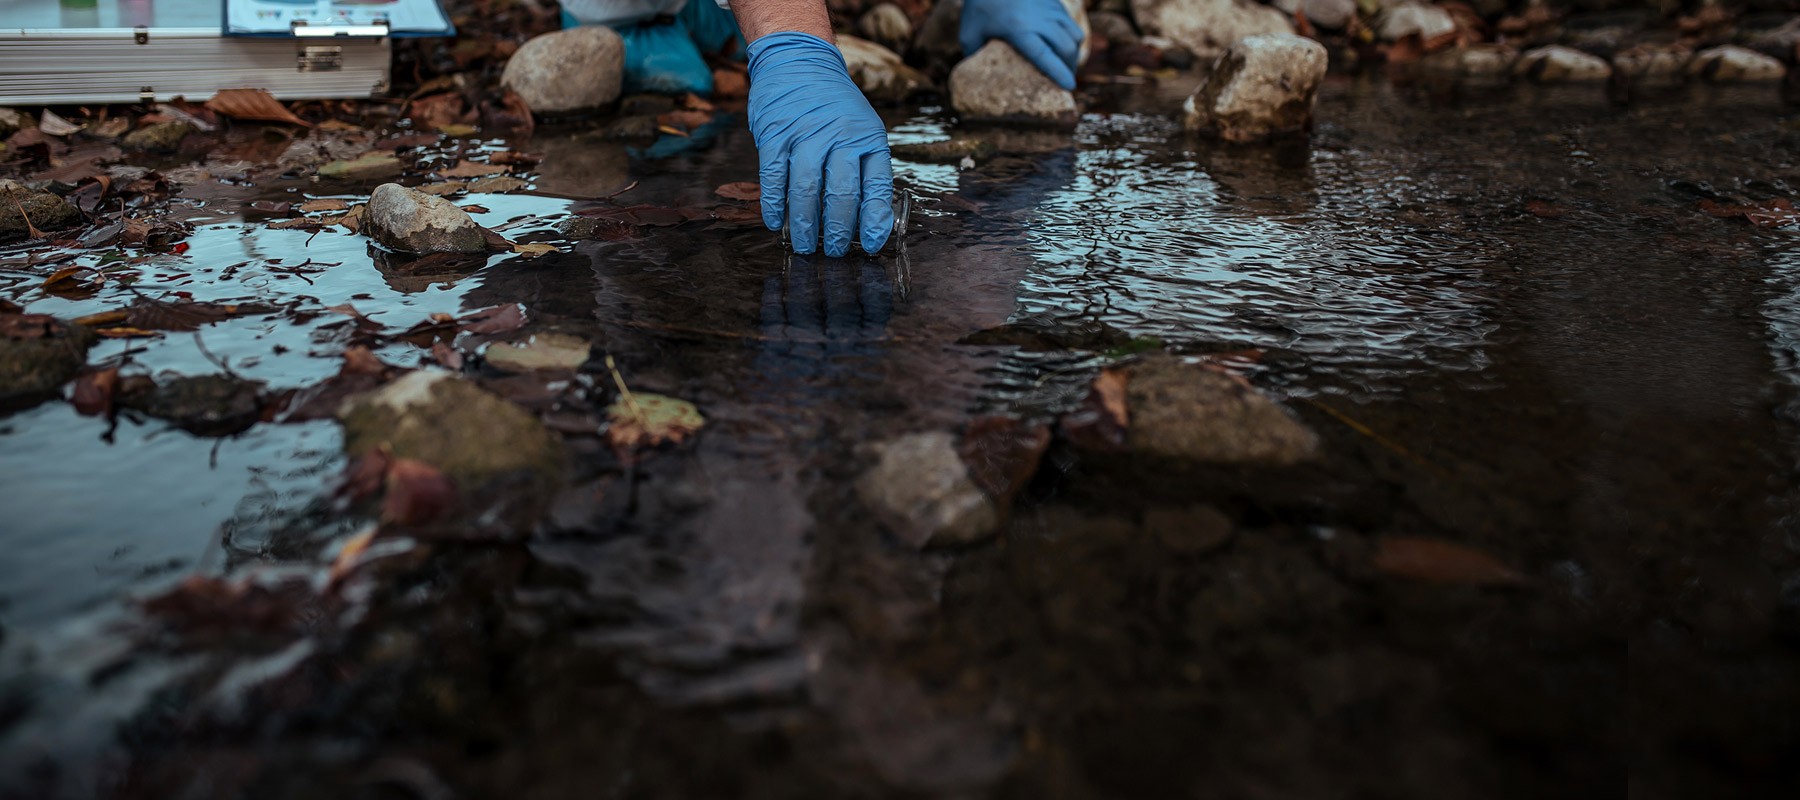 Water quality testing in a river bed